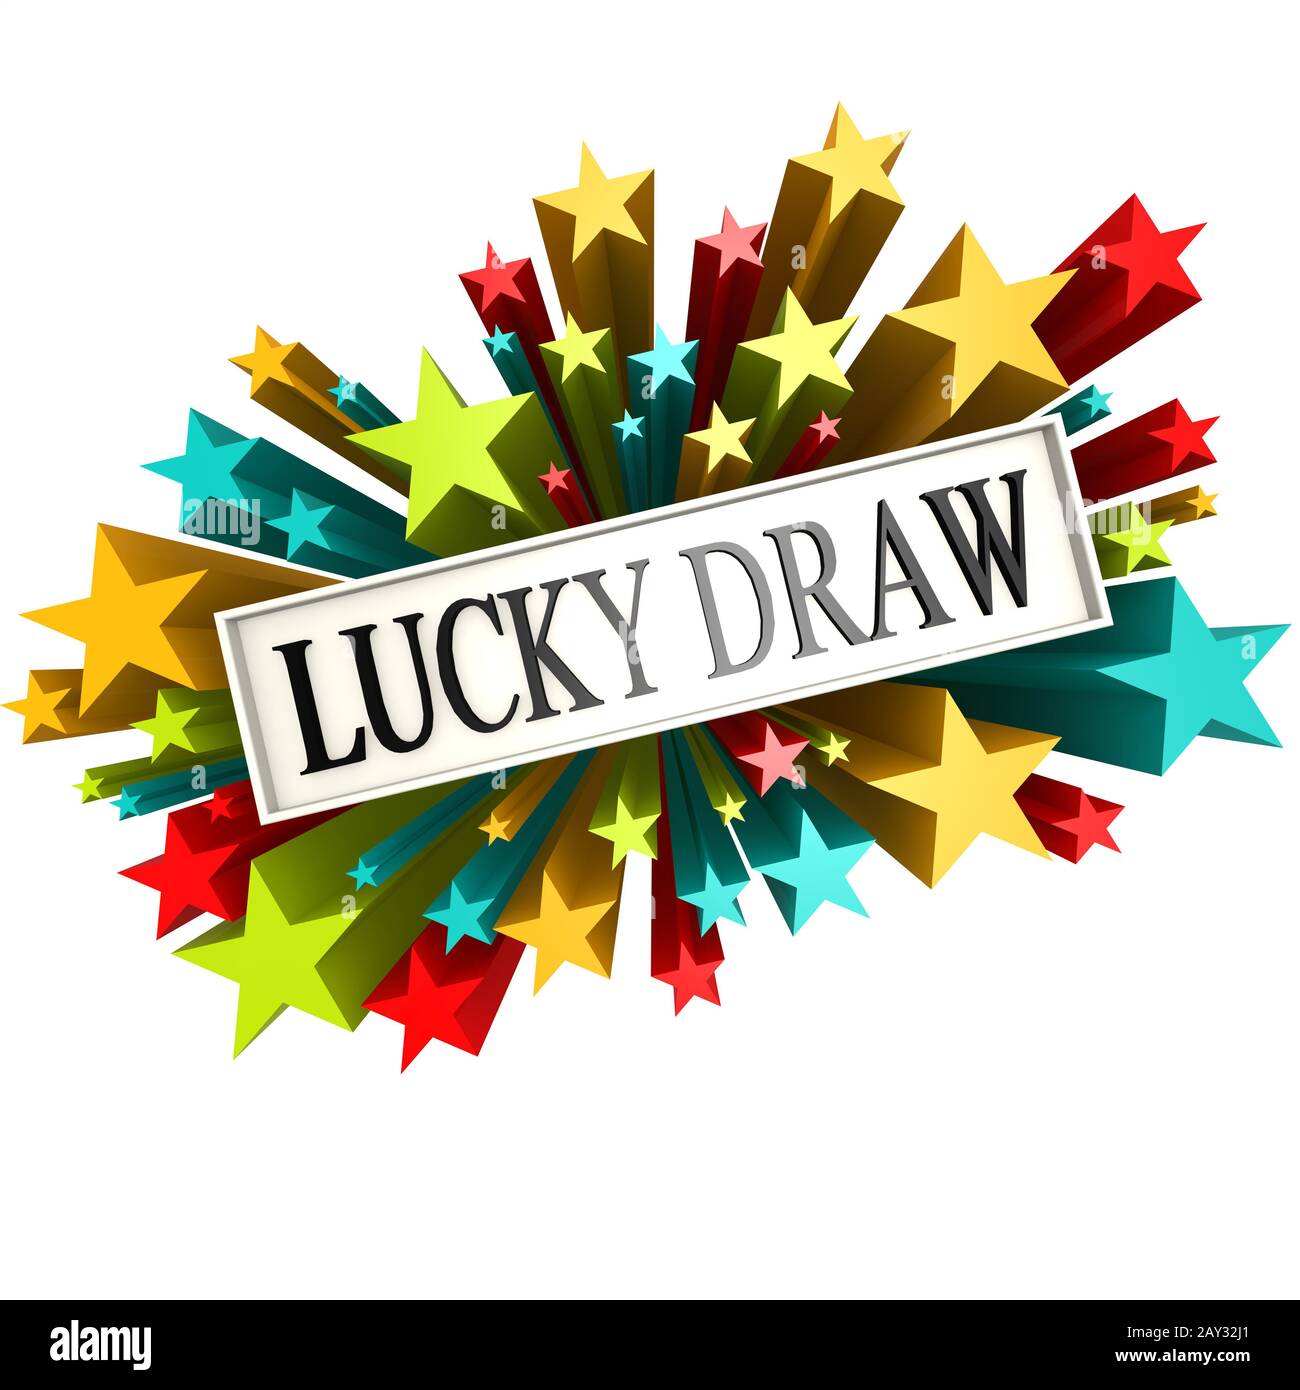 LG launches lucky draw worth Rs. 8 crores | Nagaland Post-saigonsouth.com.vn